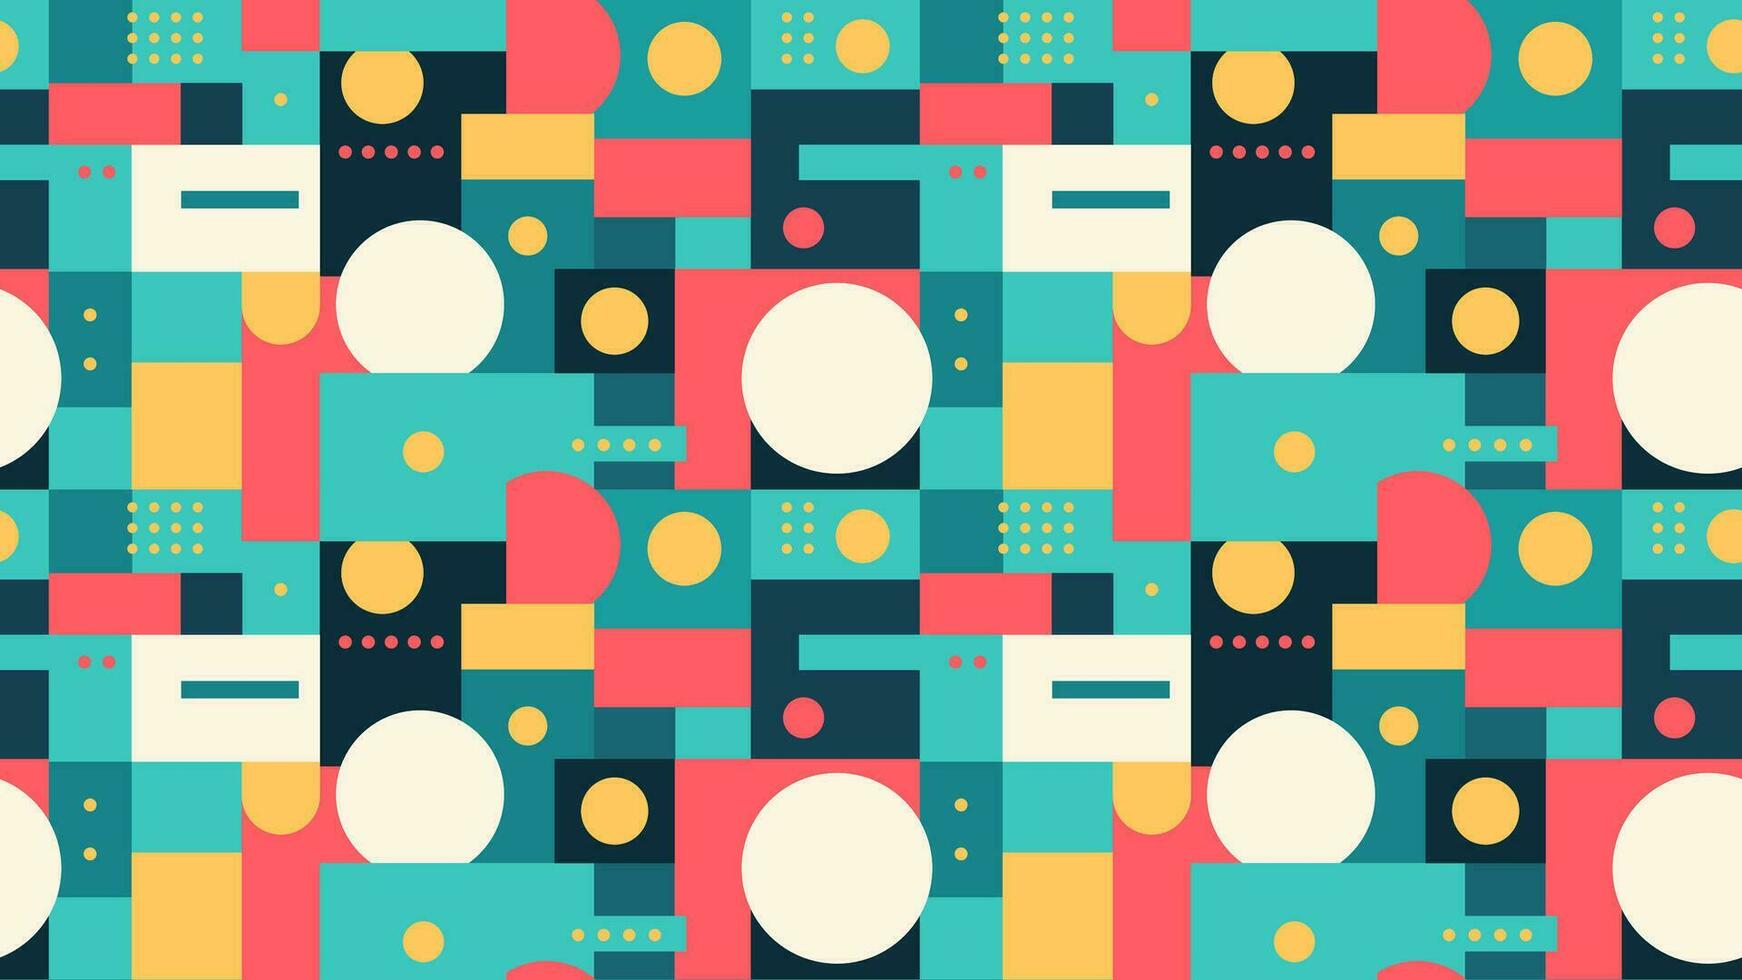 Abstract Geometric Seamless Pattern with Simple Minimalistic Shapes. Vector Background with Circles and Rectangles